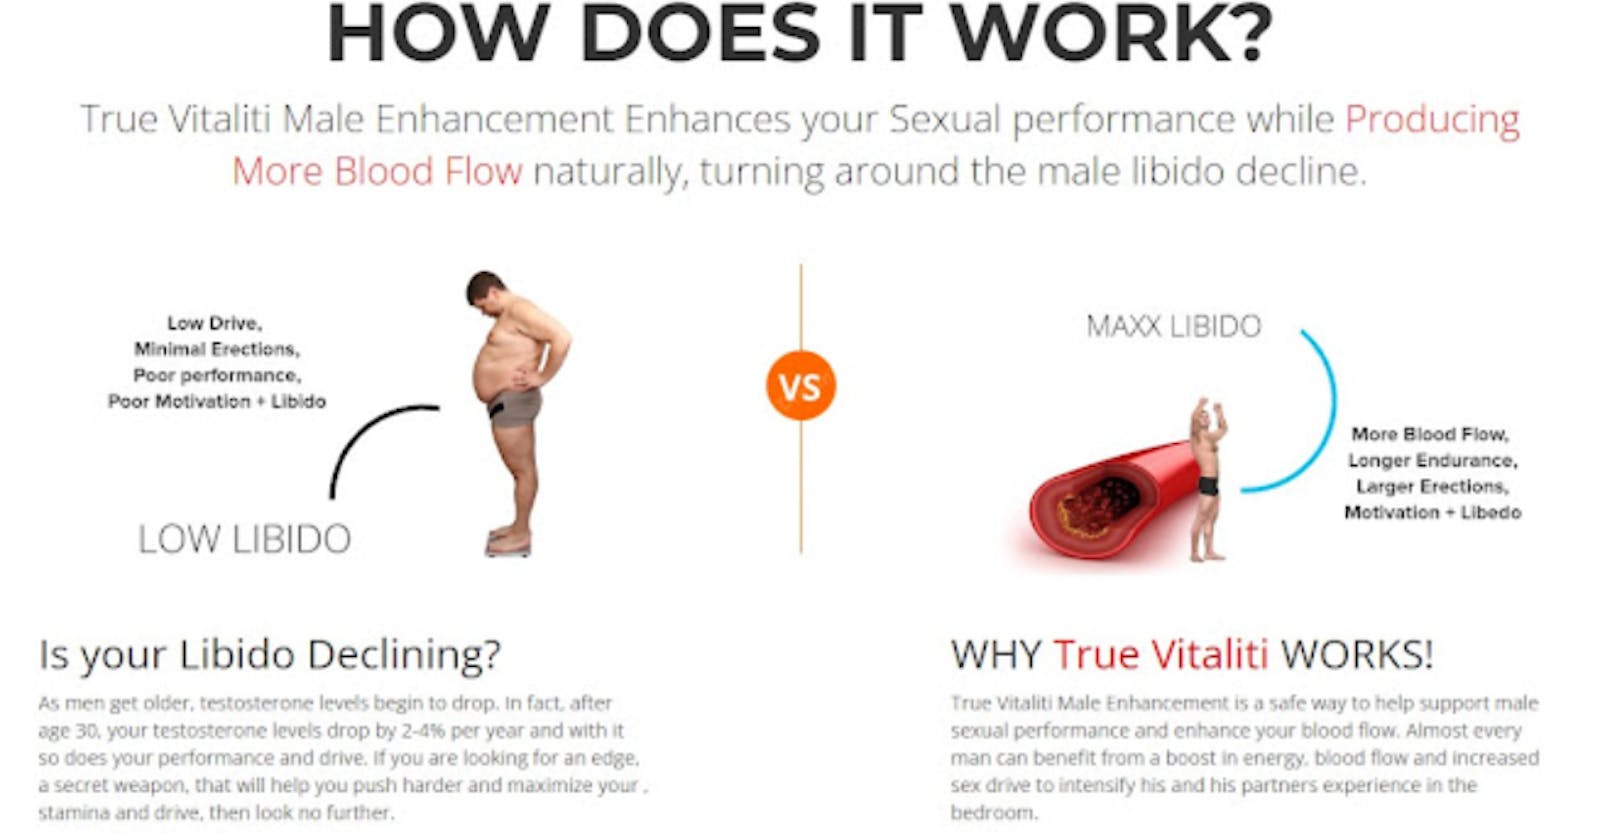 True Vitality Male Enhancement Reviews | Ingredients, Benefits, Side Effects and Where to Buy